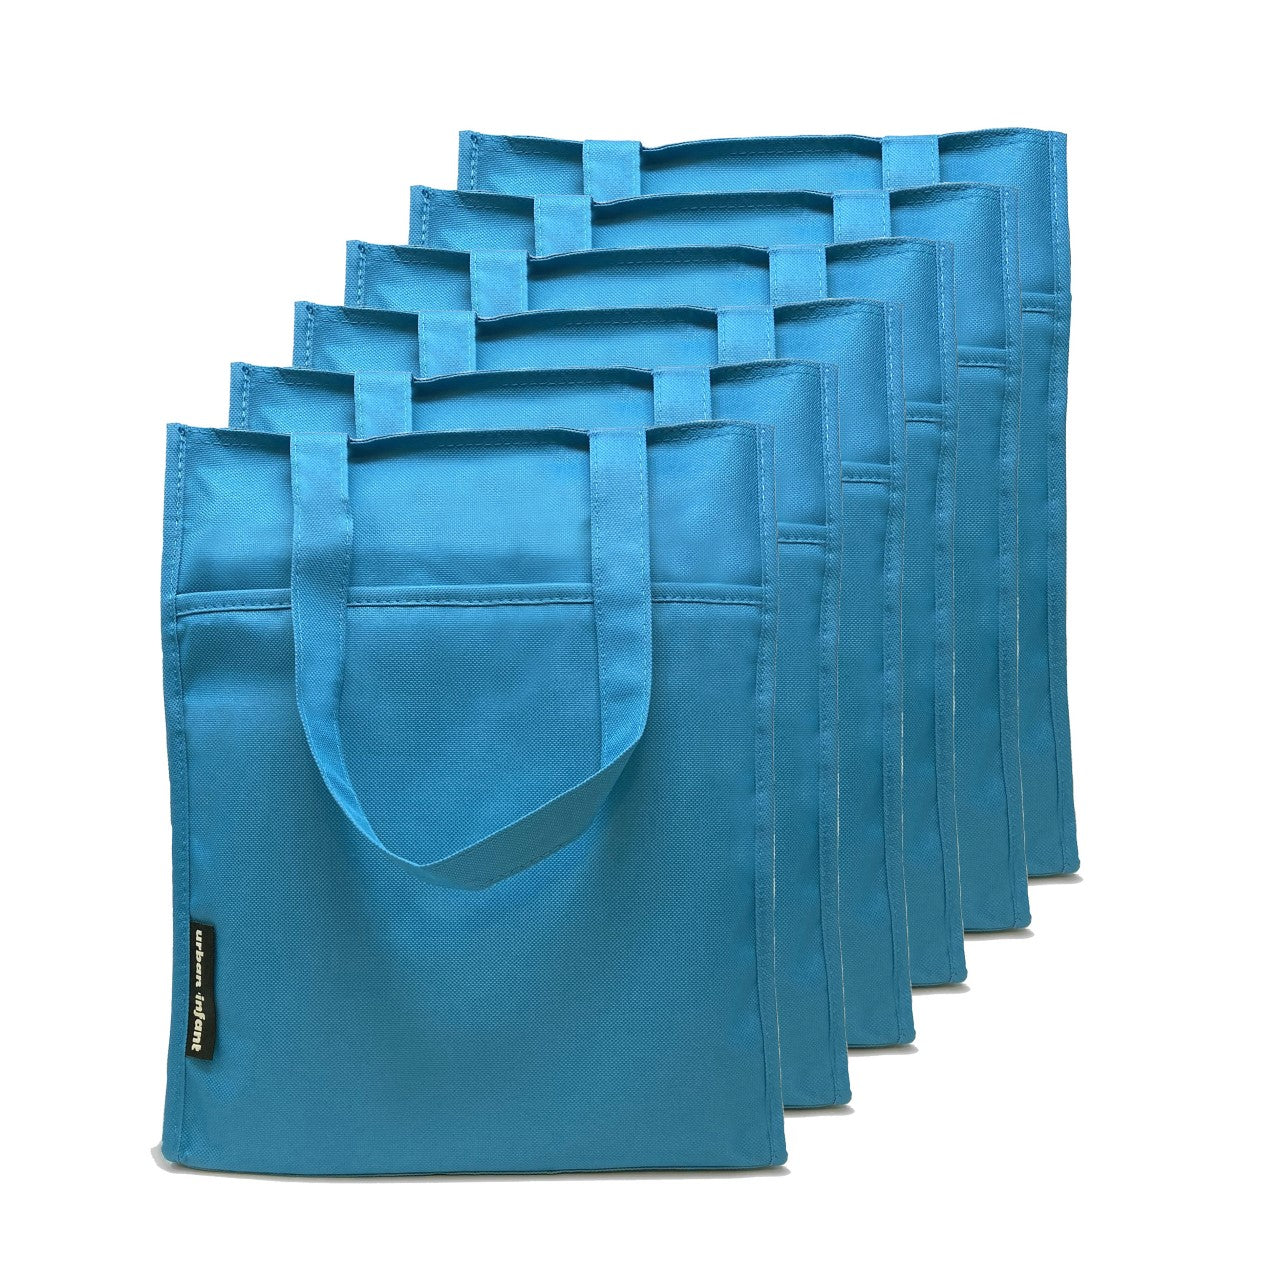 Activity Tote - Case of 6